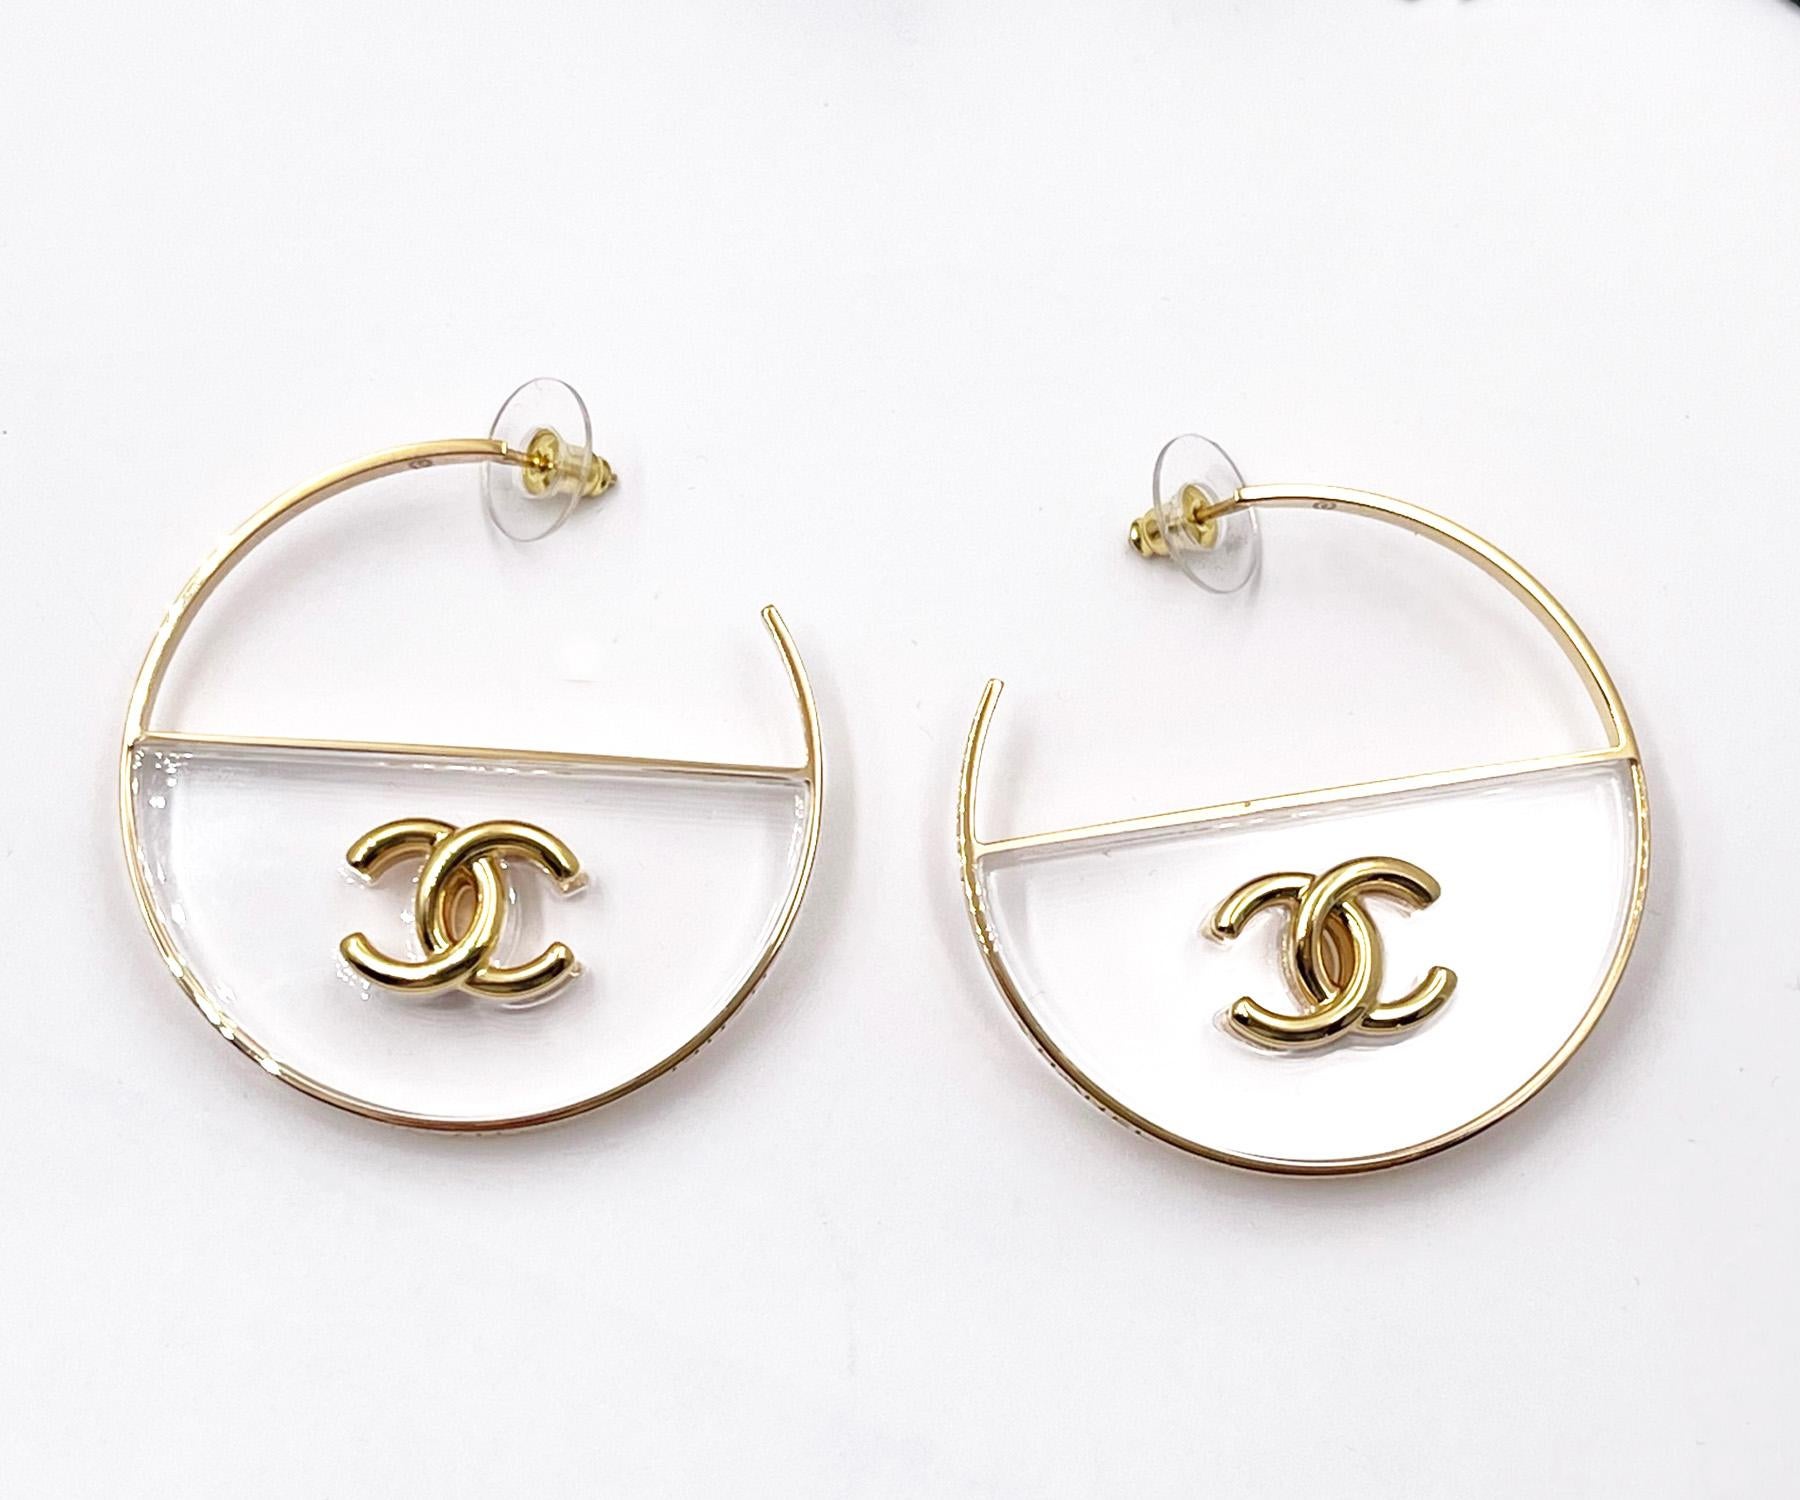 Chanel Brand New Gold CC Transparent Large Hoop Earrings

* Marked 23
* Made in Italy
*Comes with the original dustbag, pouch, tag, booklet, ribbon and tag

- It is approximately 2